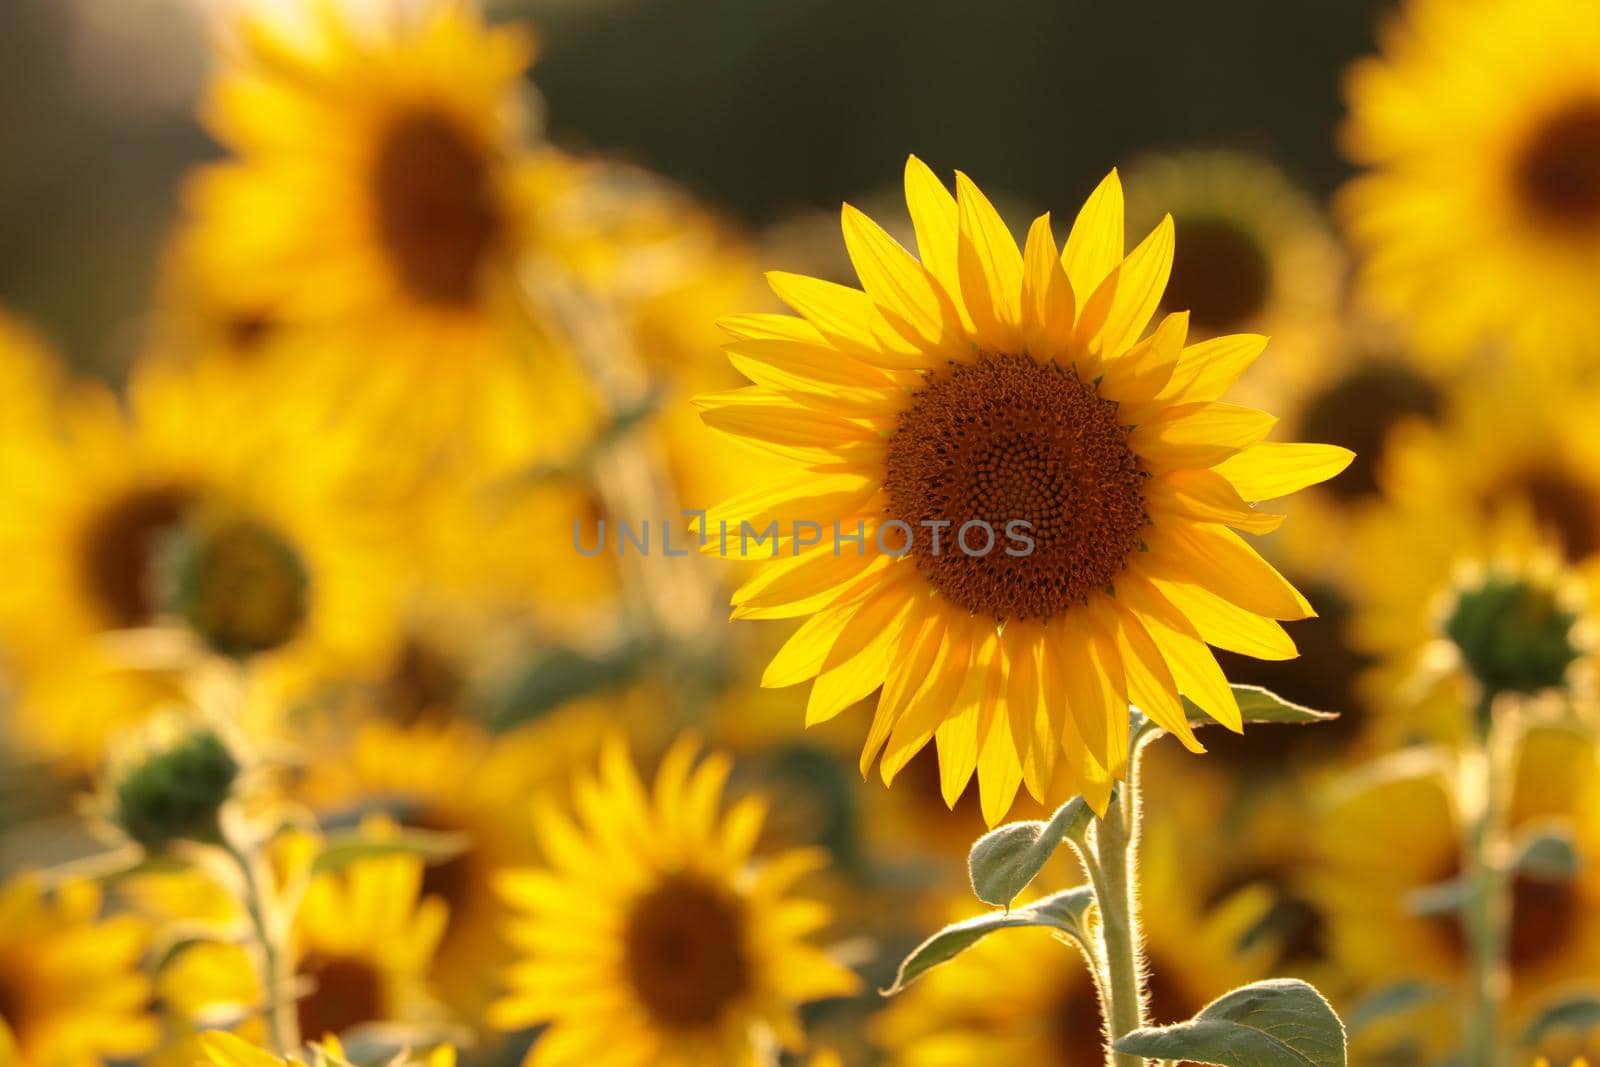 Sunflower - Helianthus annuus in the field at dusk.